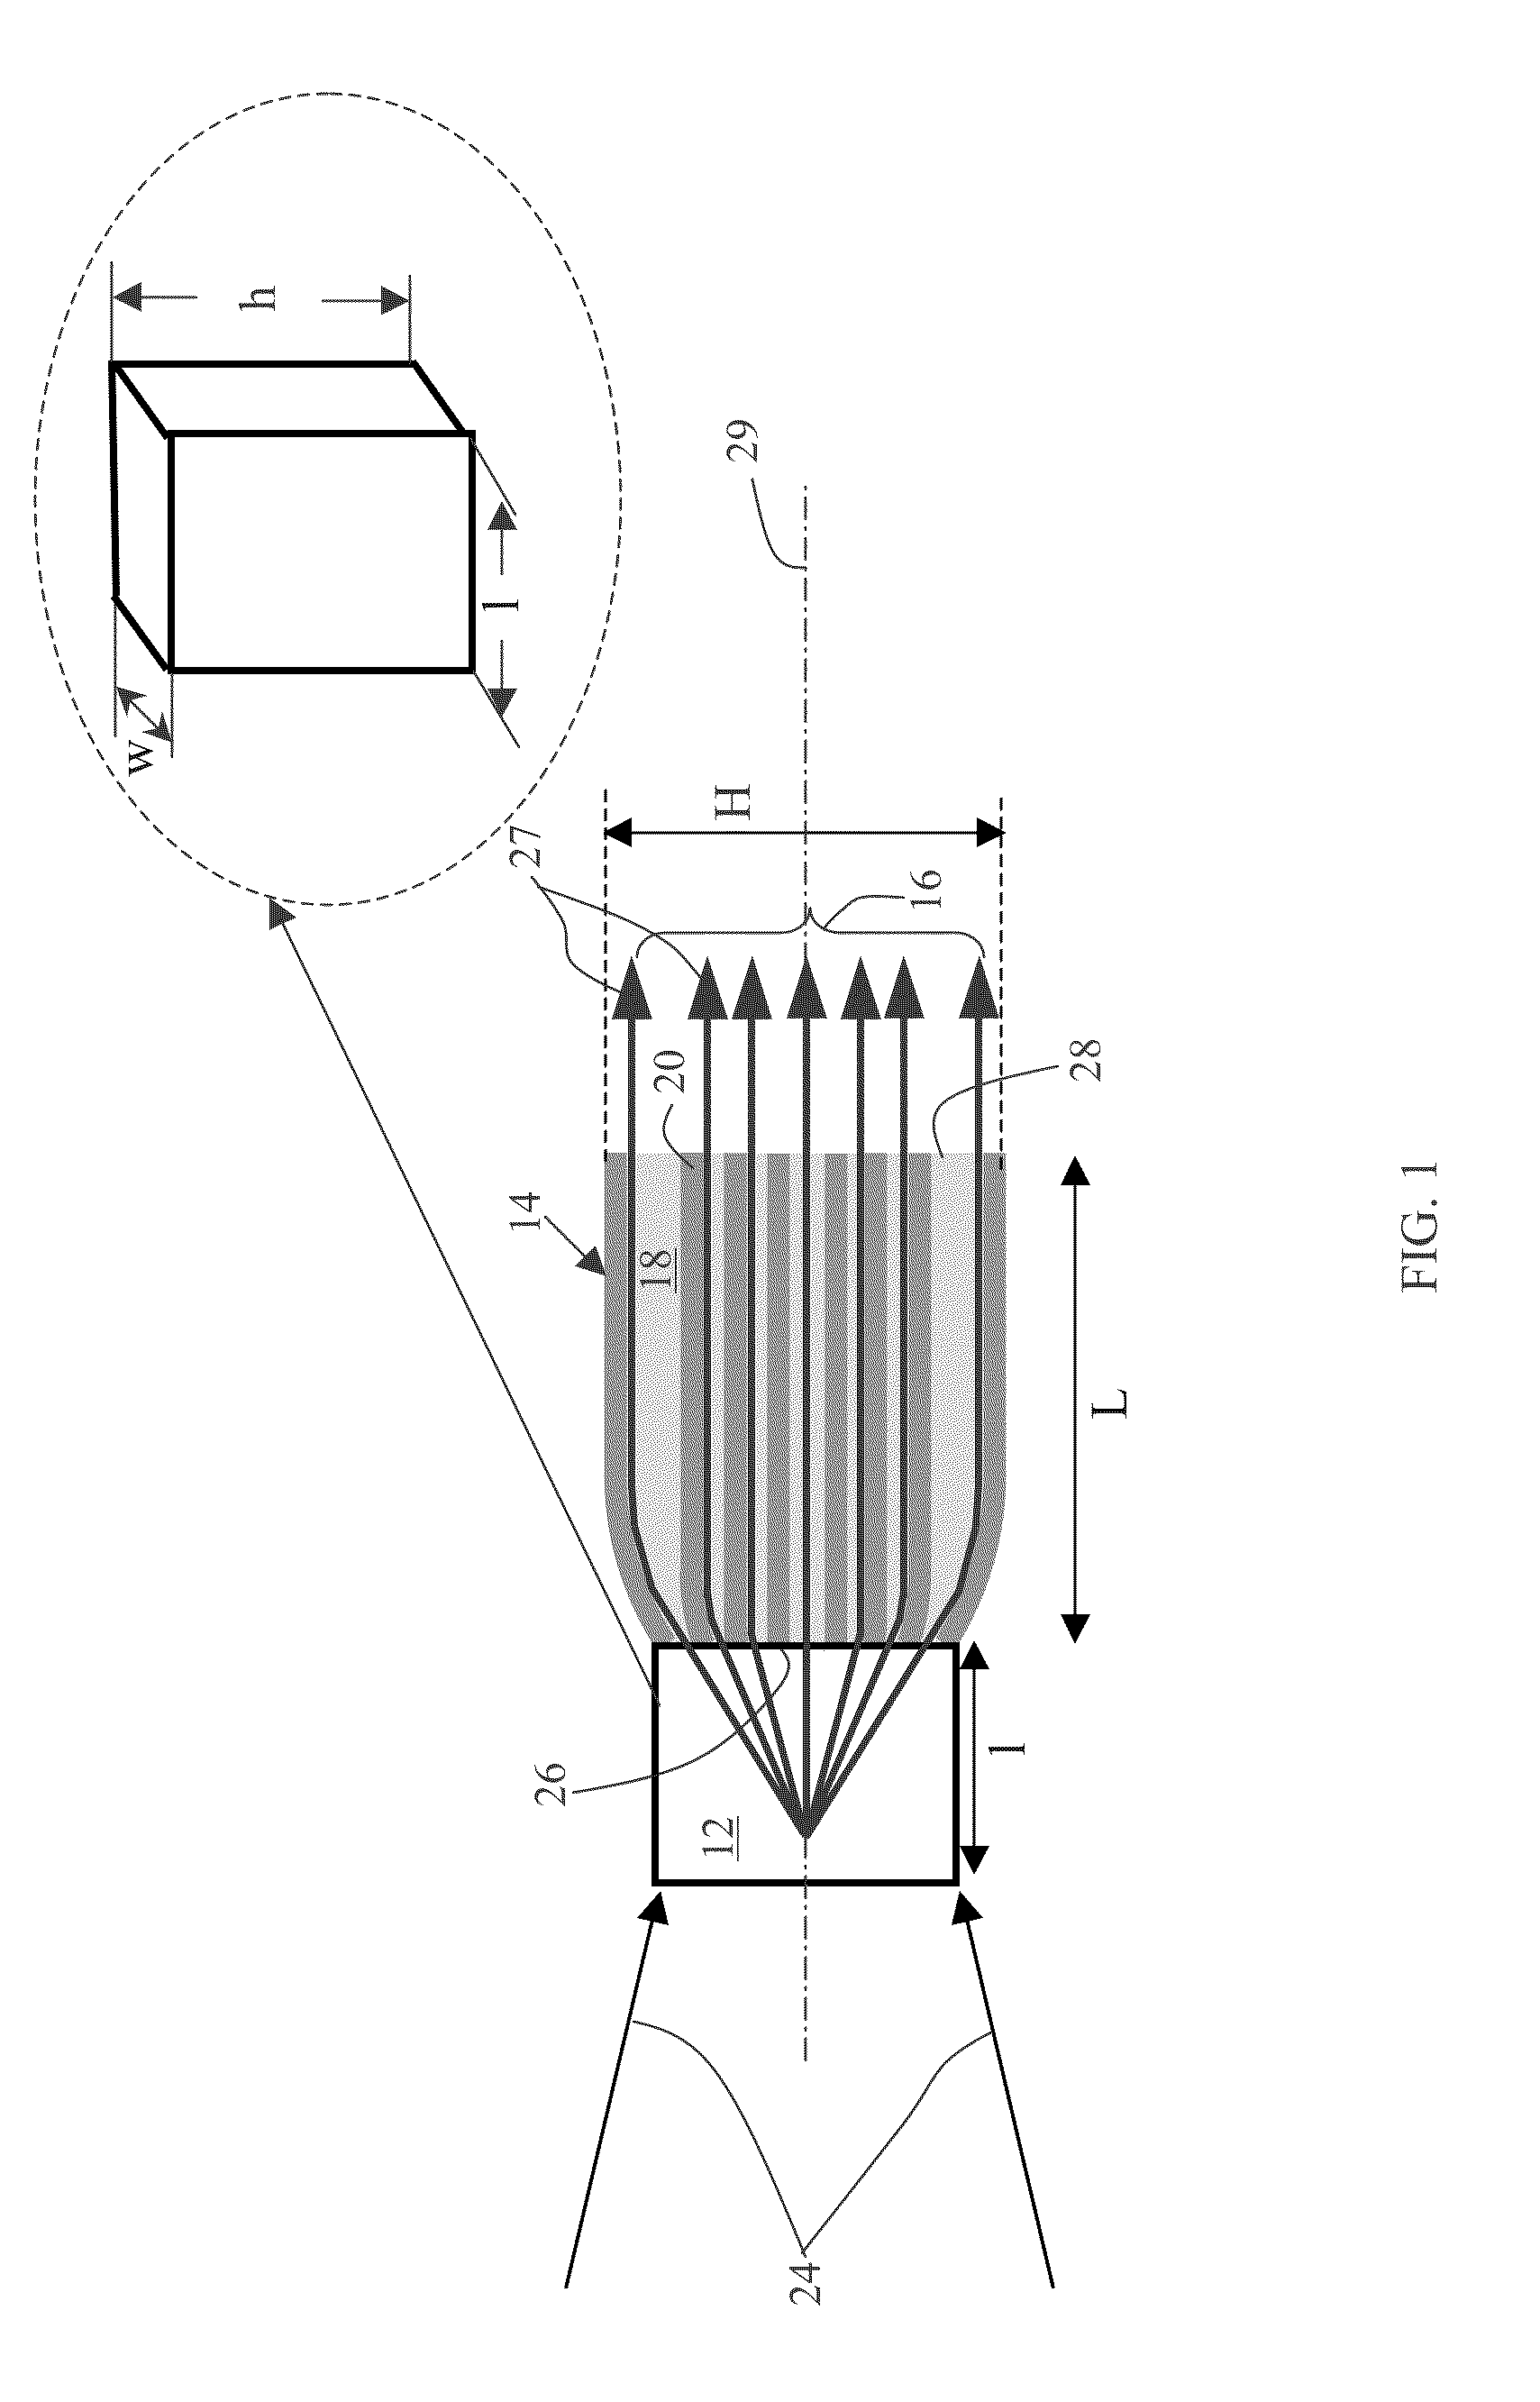 Integrated X-ray source having a multilayer total internal reflection optic device